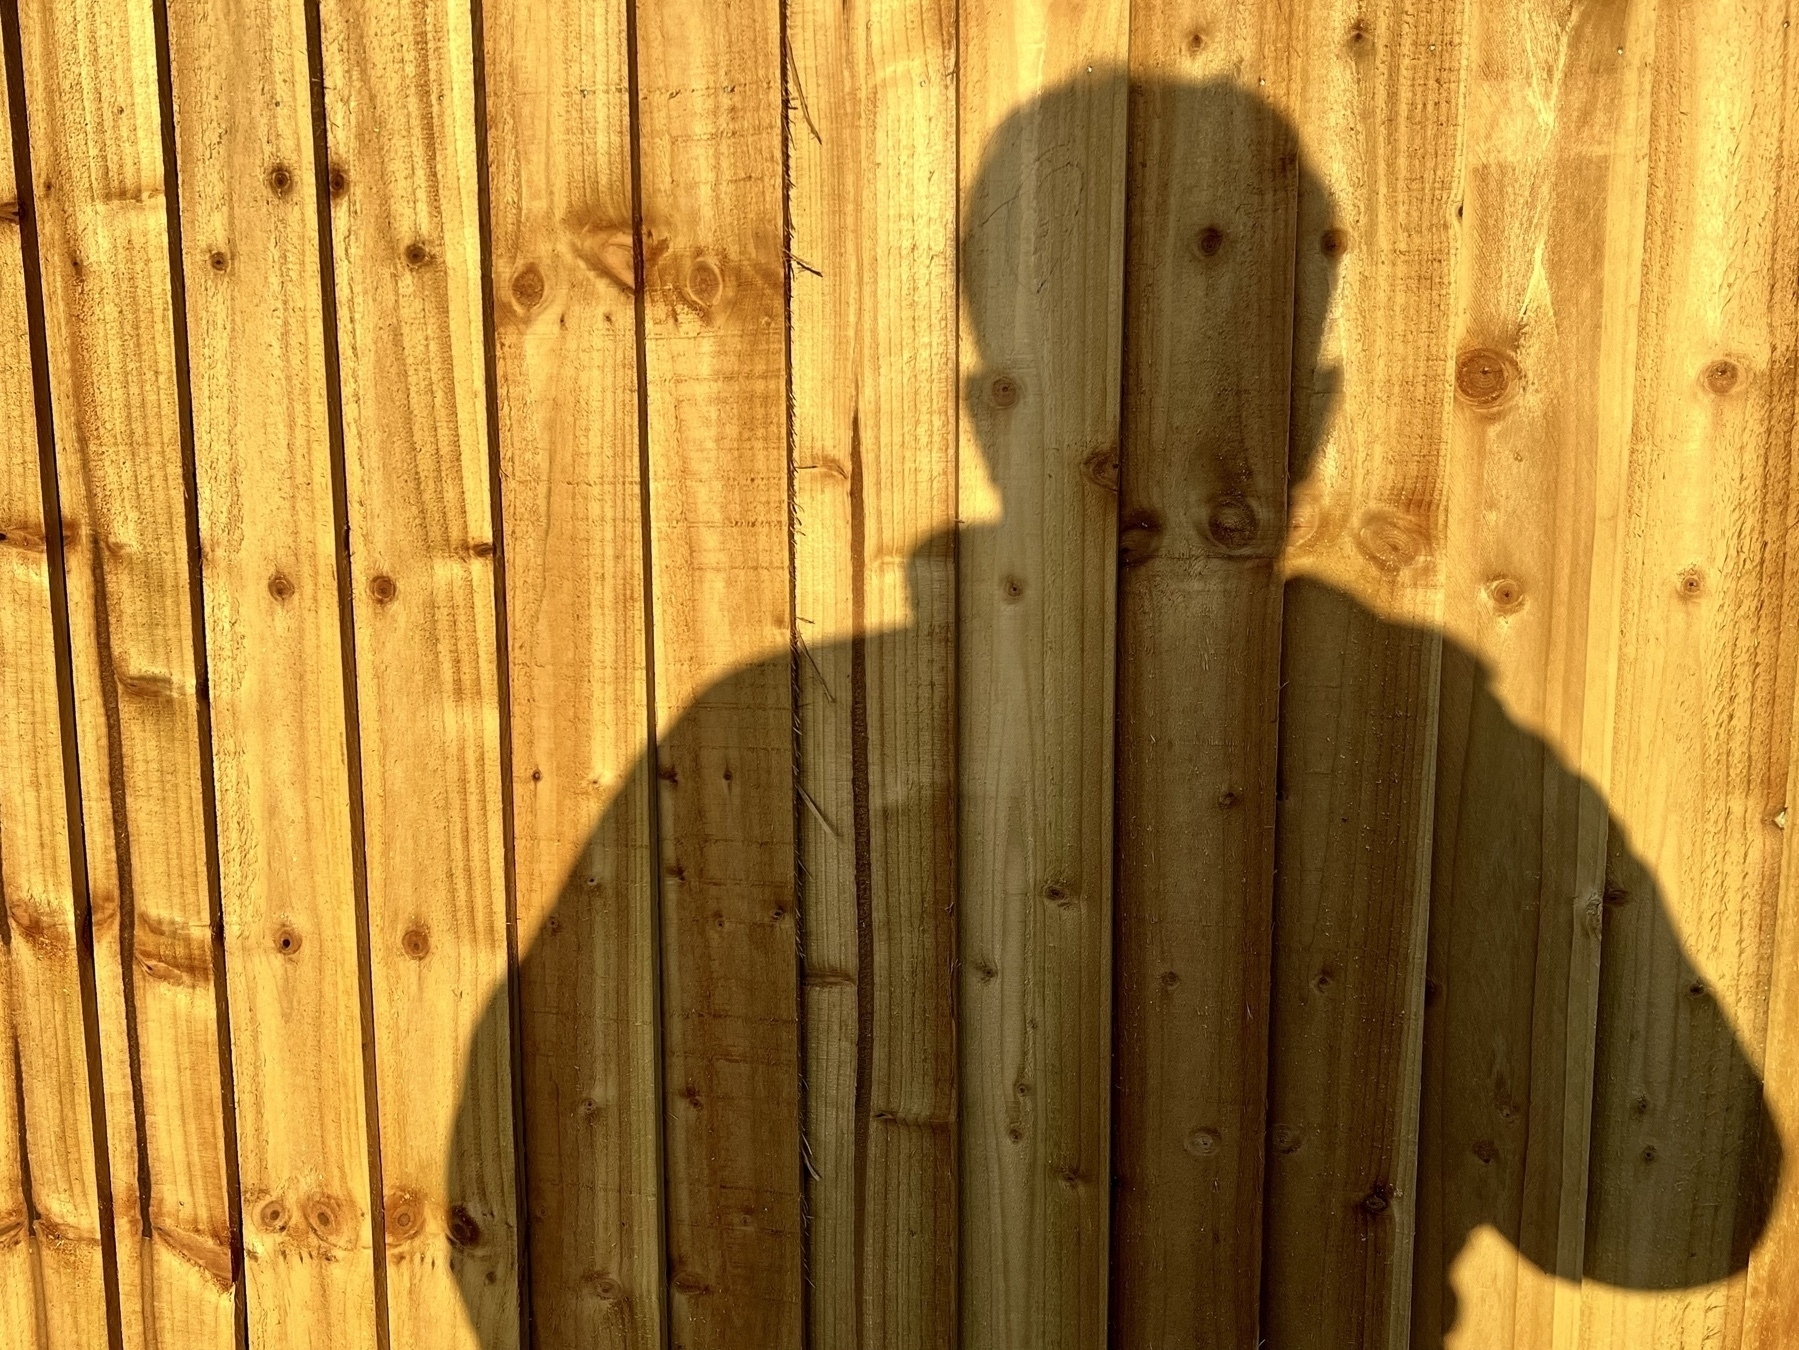 My shadow in evening sunlight on a wooden fence. 